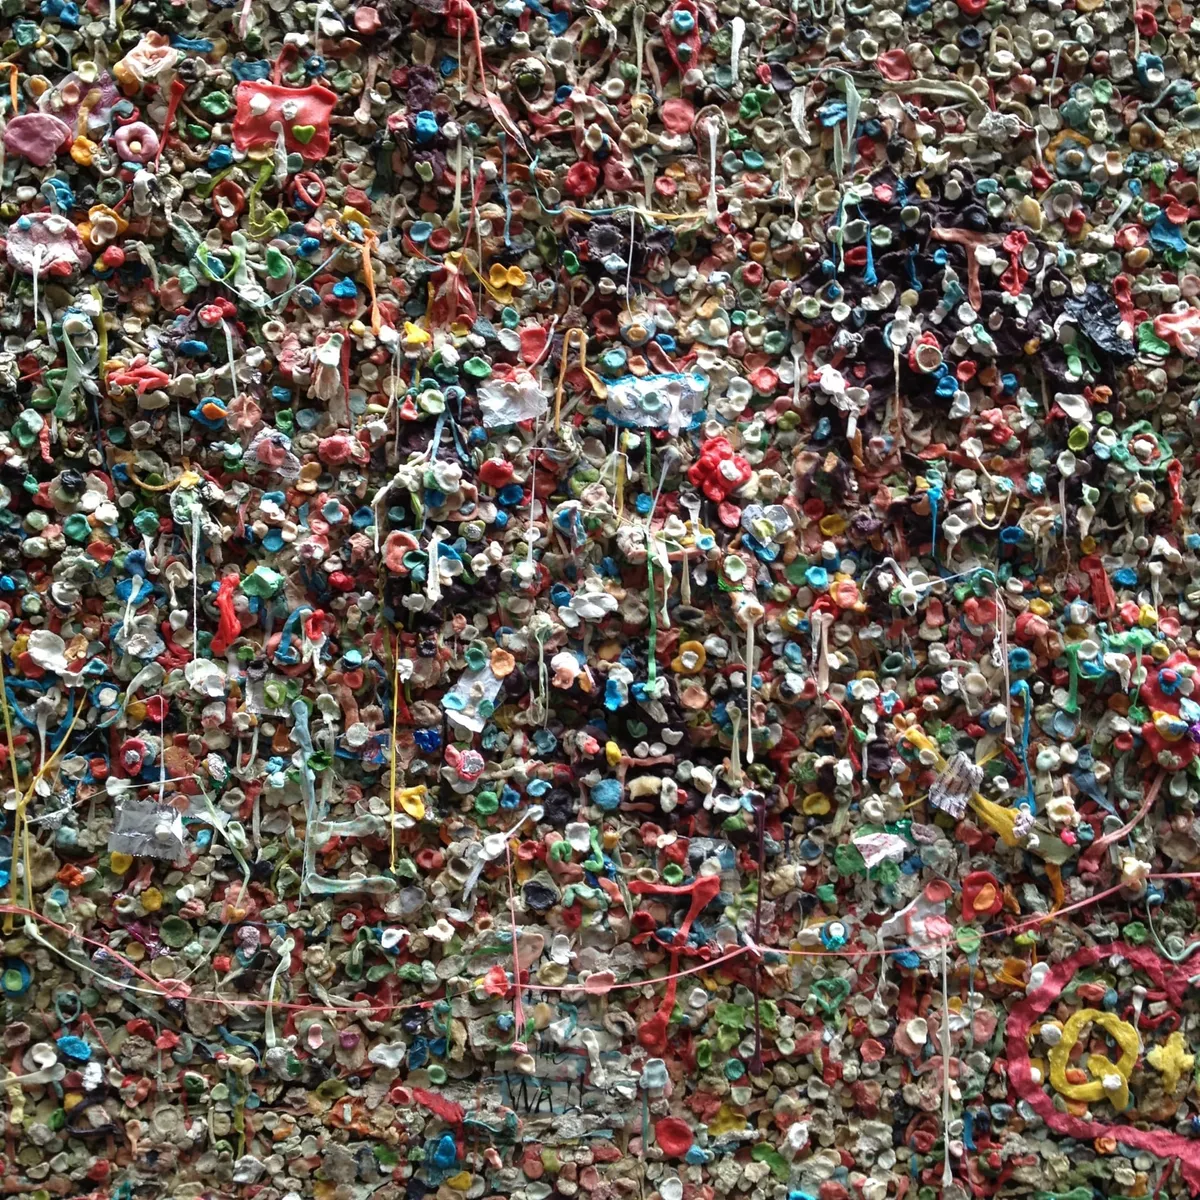 Wall covered in chewed gum